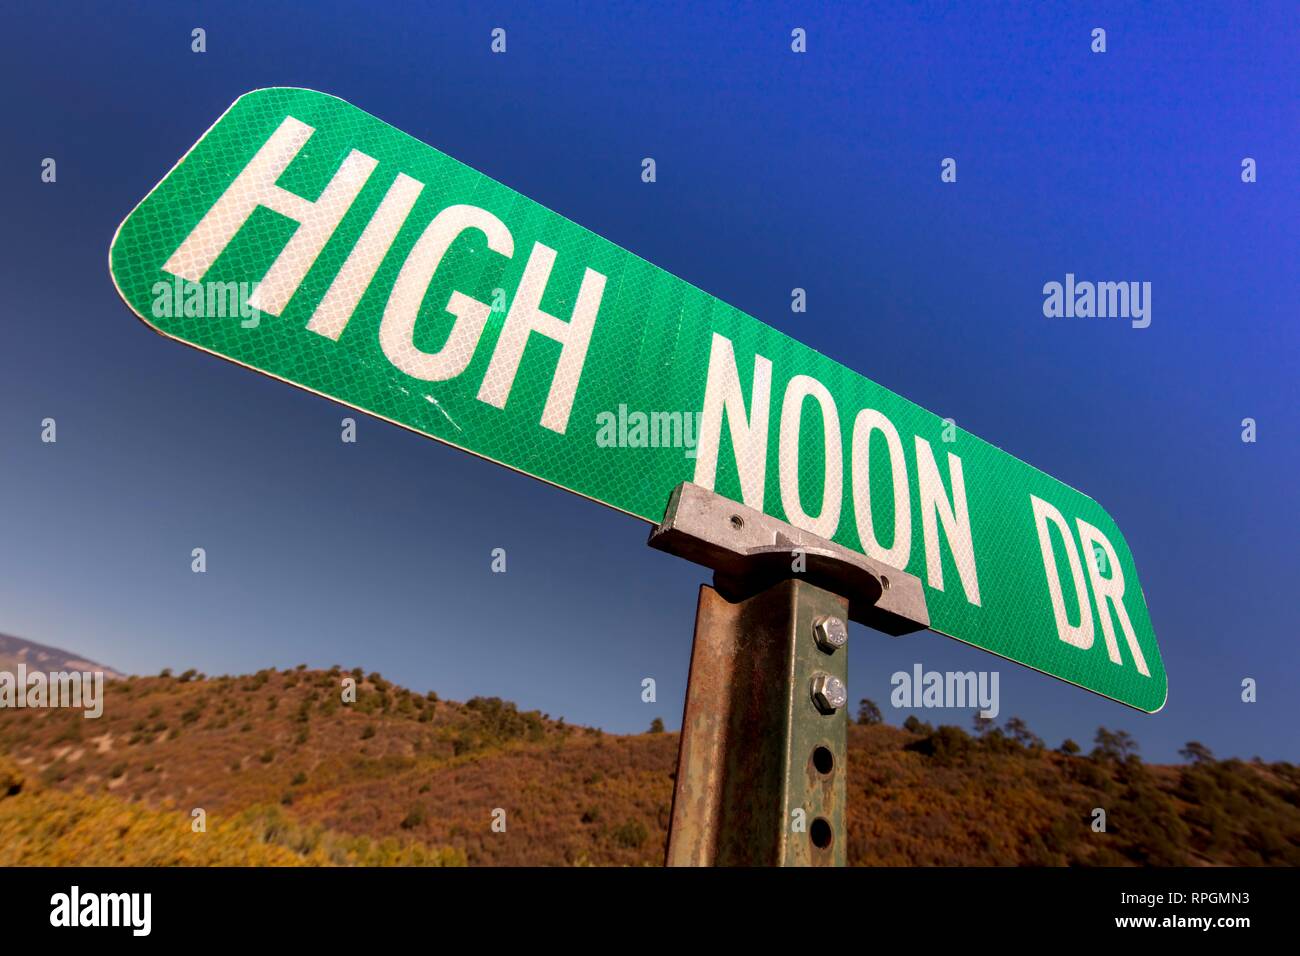 The WEST, USA, High Noon Drive Road Sign, the Old West, USA Stock Photo